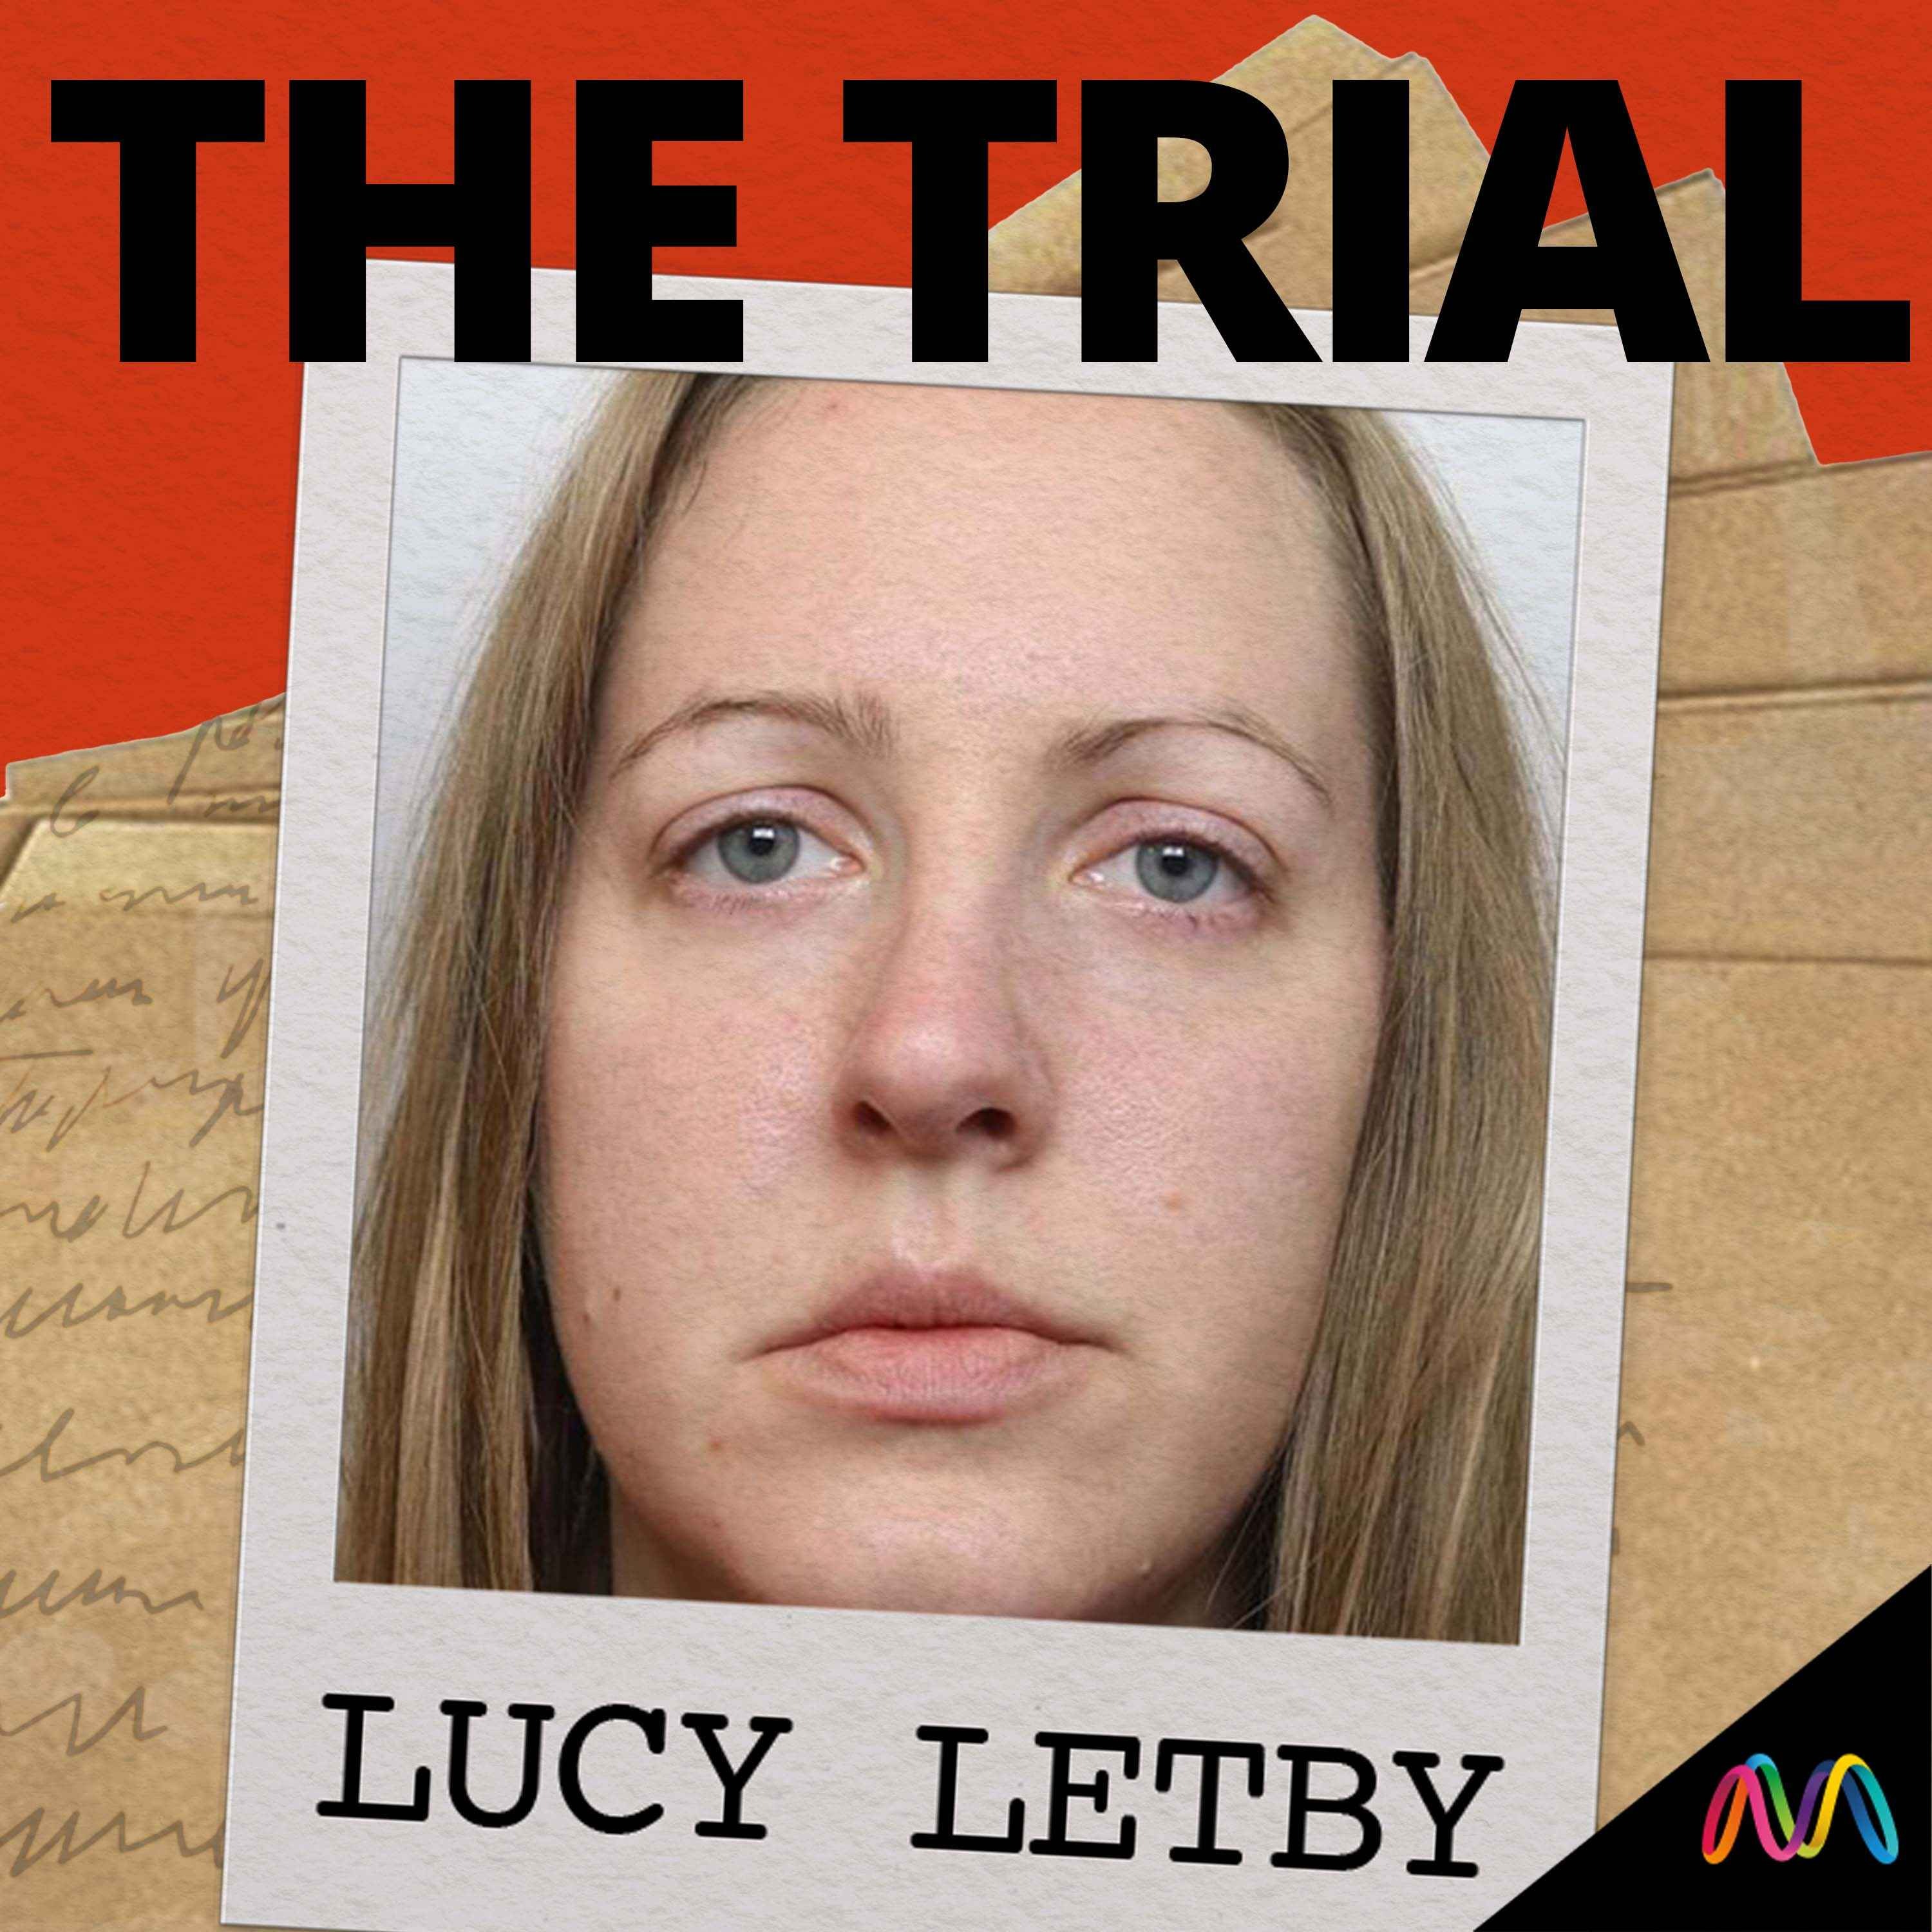 Lucy Letby: Off the ward